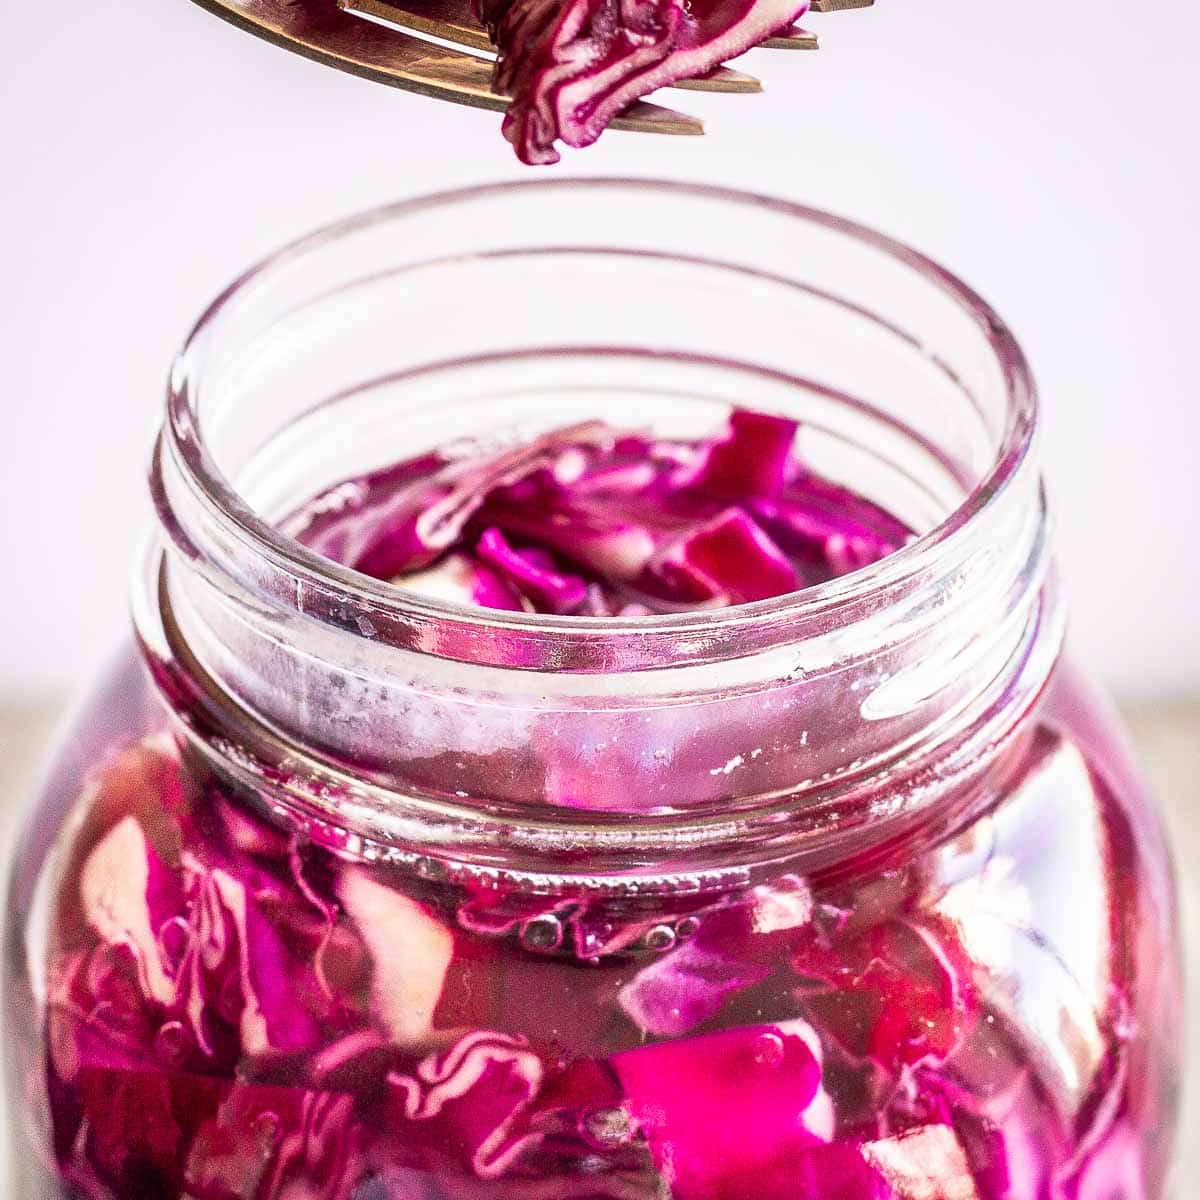 Glass jar filled with bright pink red cabbage sauerkraut. A forkful is being lifted out of the jar.